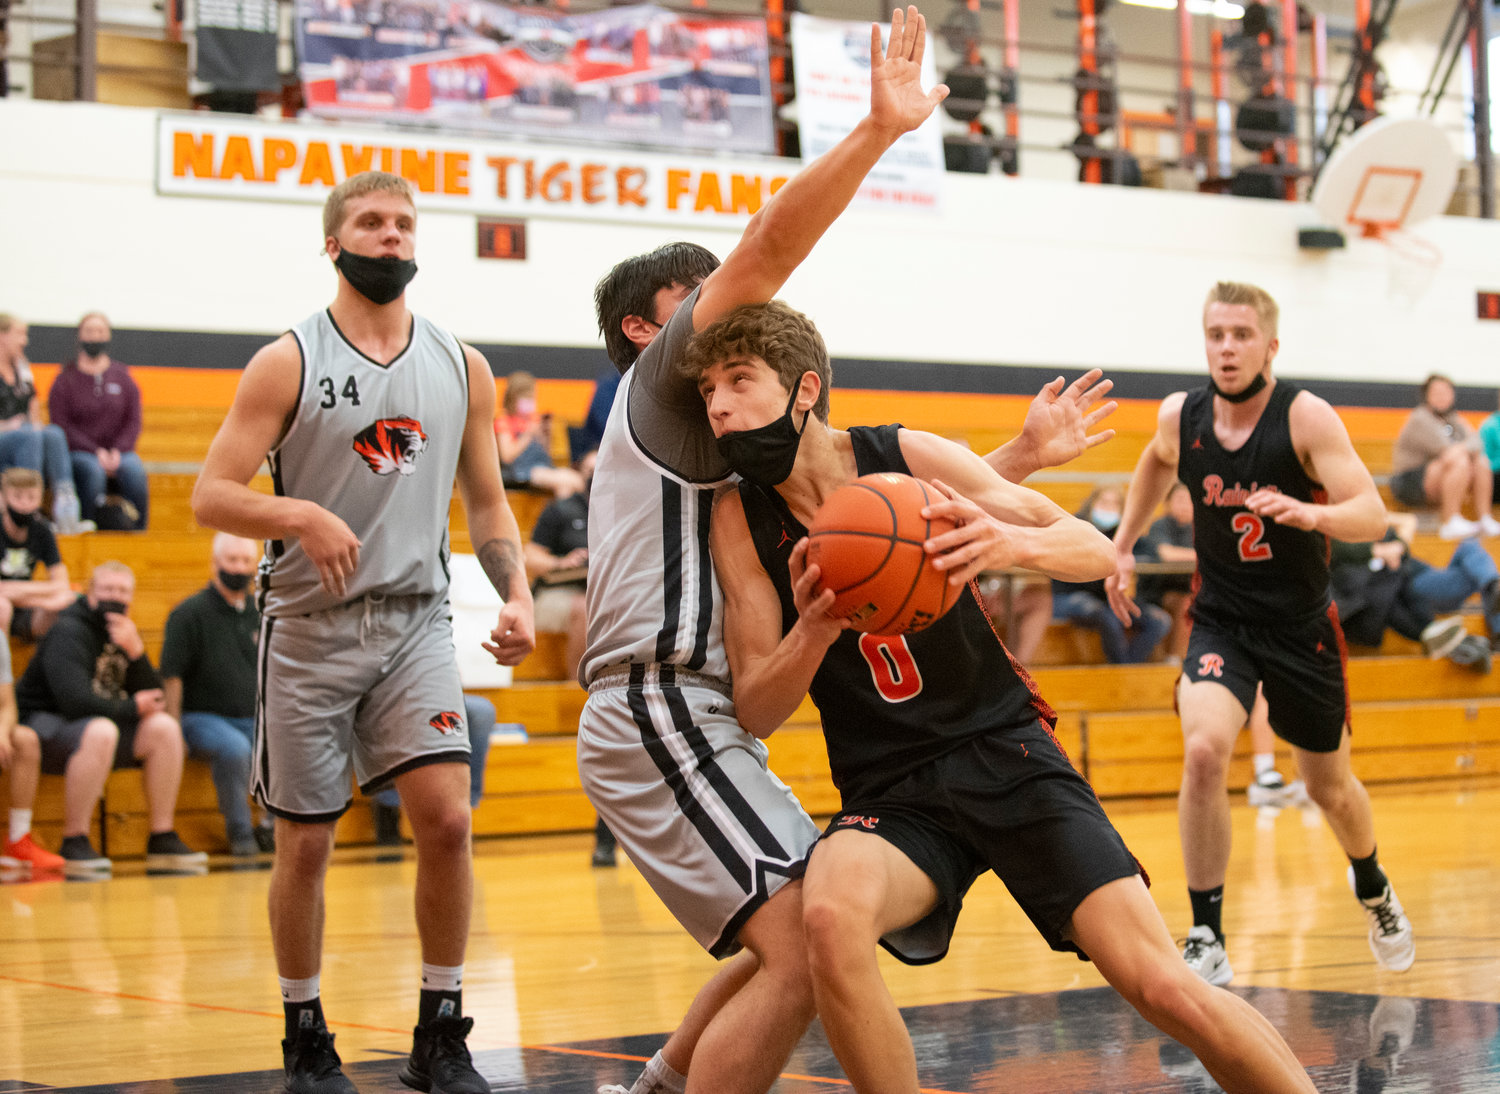 Rainier's Ian Sprouffske takes it to the hoops against Napavine's Gavin Parker on Tuesday.